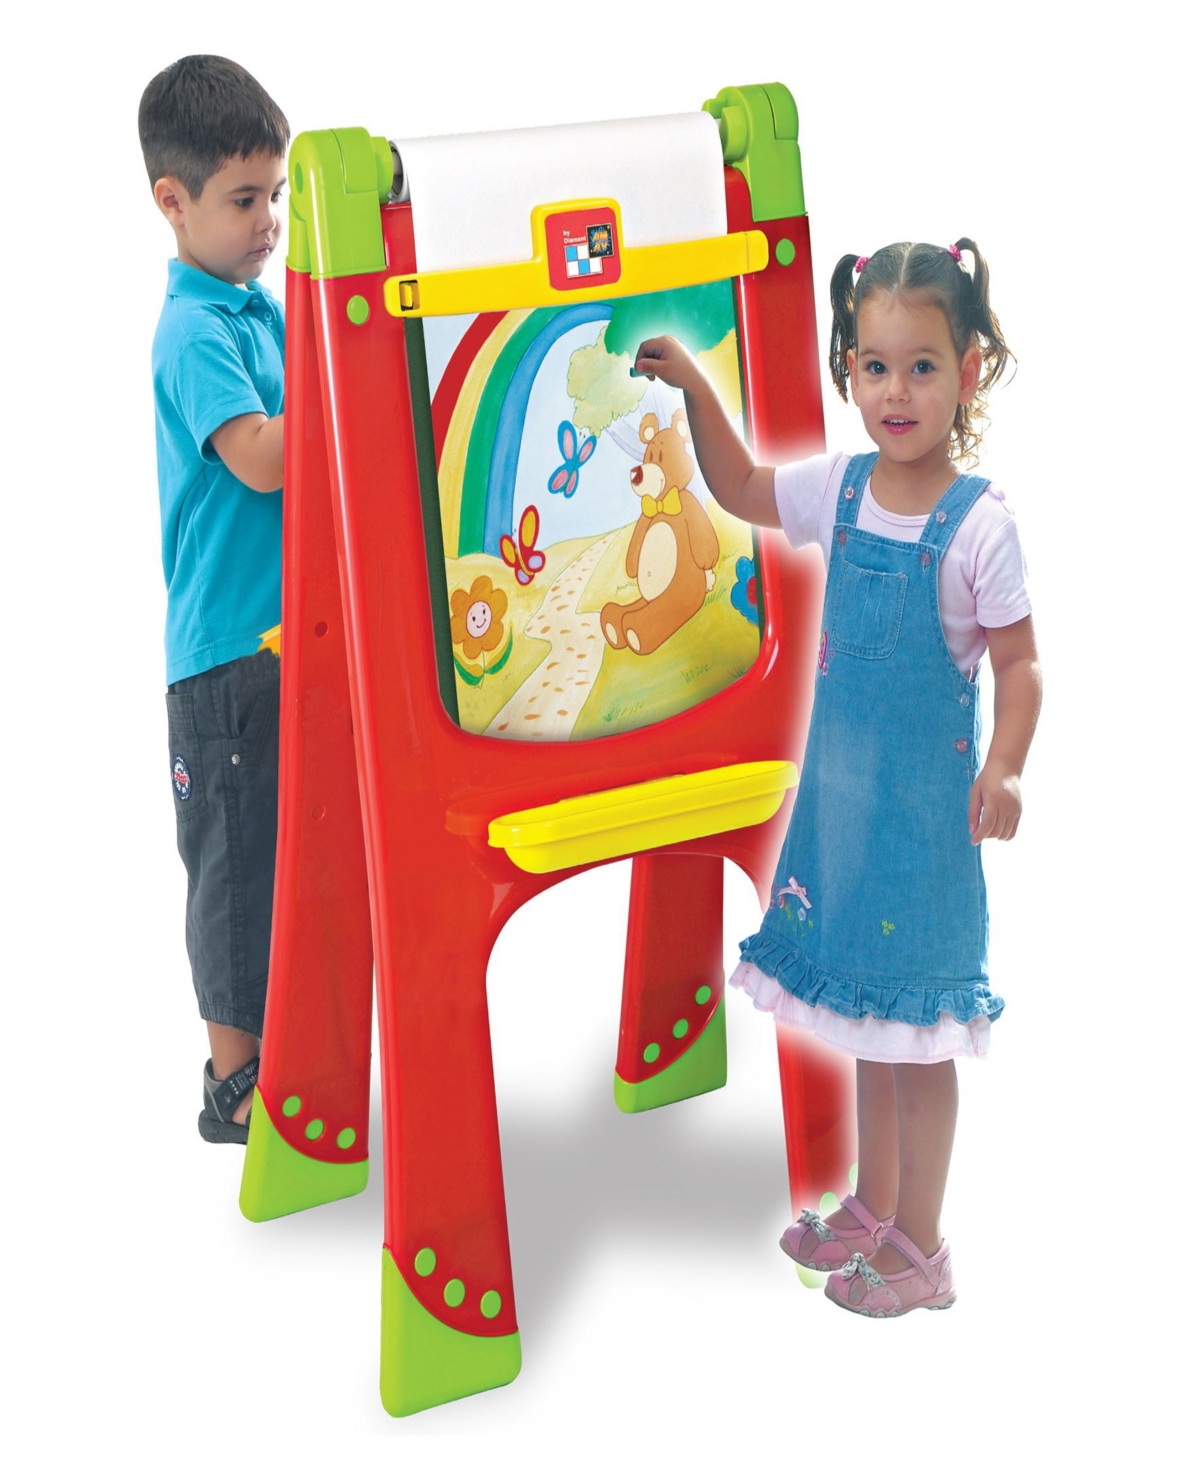 Amav Toys - 5 in 1 Double Sided Easel - Multi